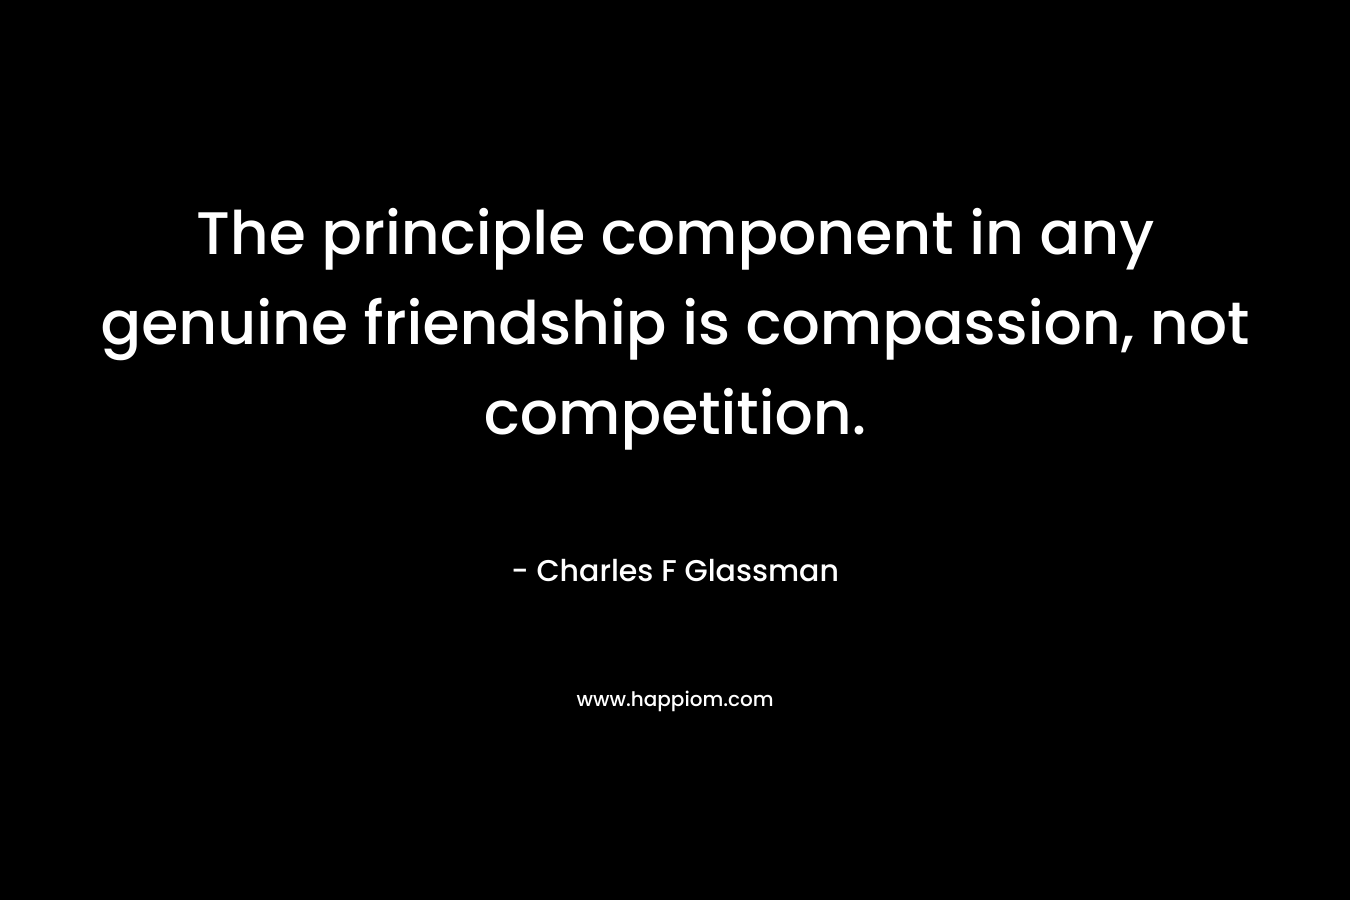 The principle component in any genuine friendship is compassion, not competition. – Charles F Glassman